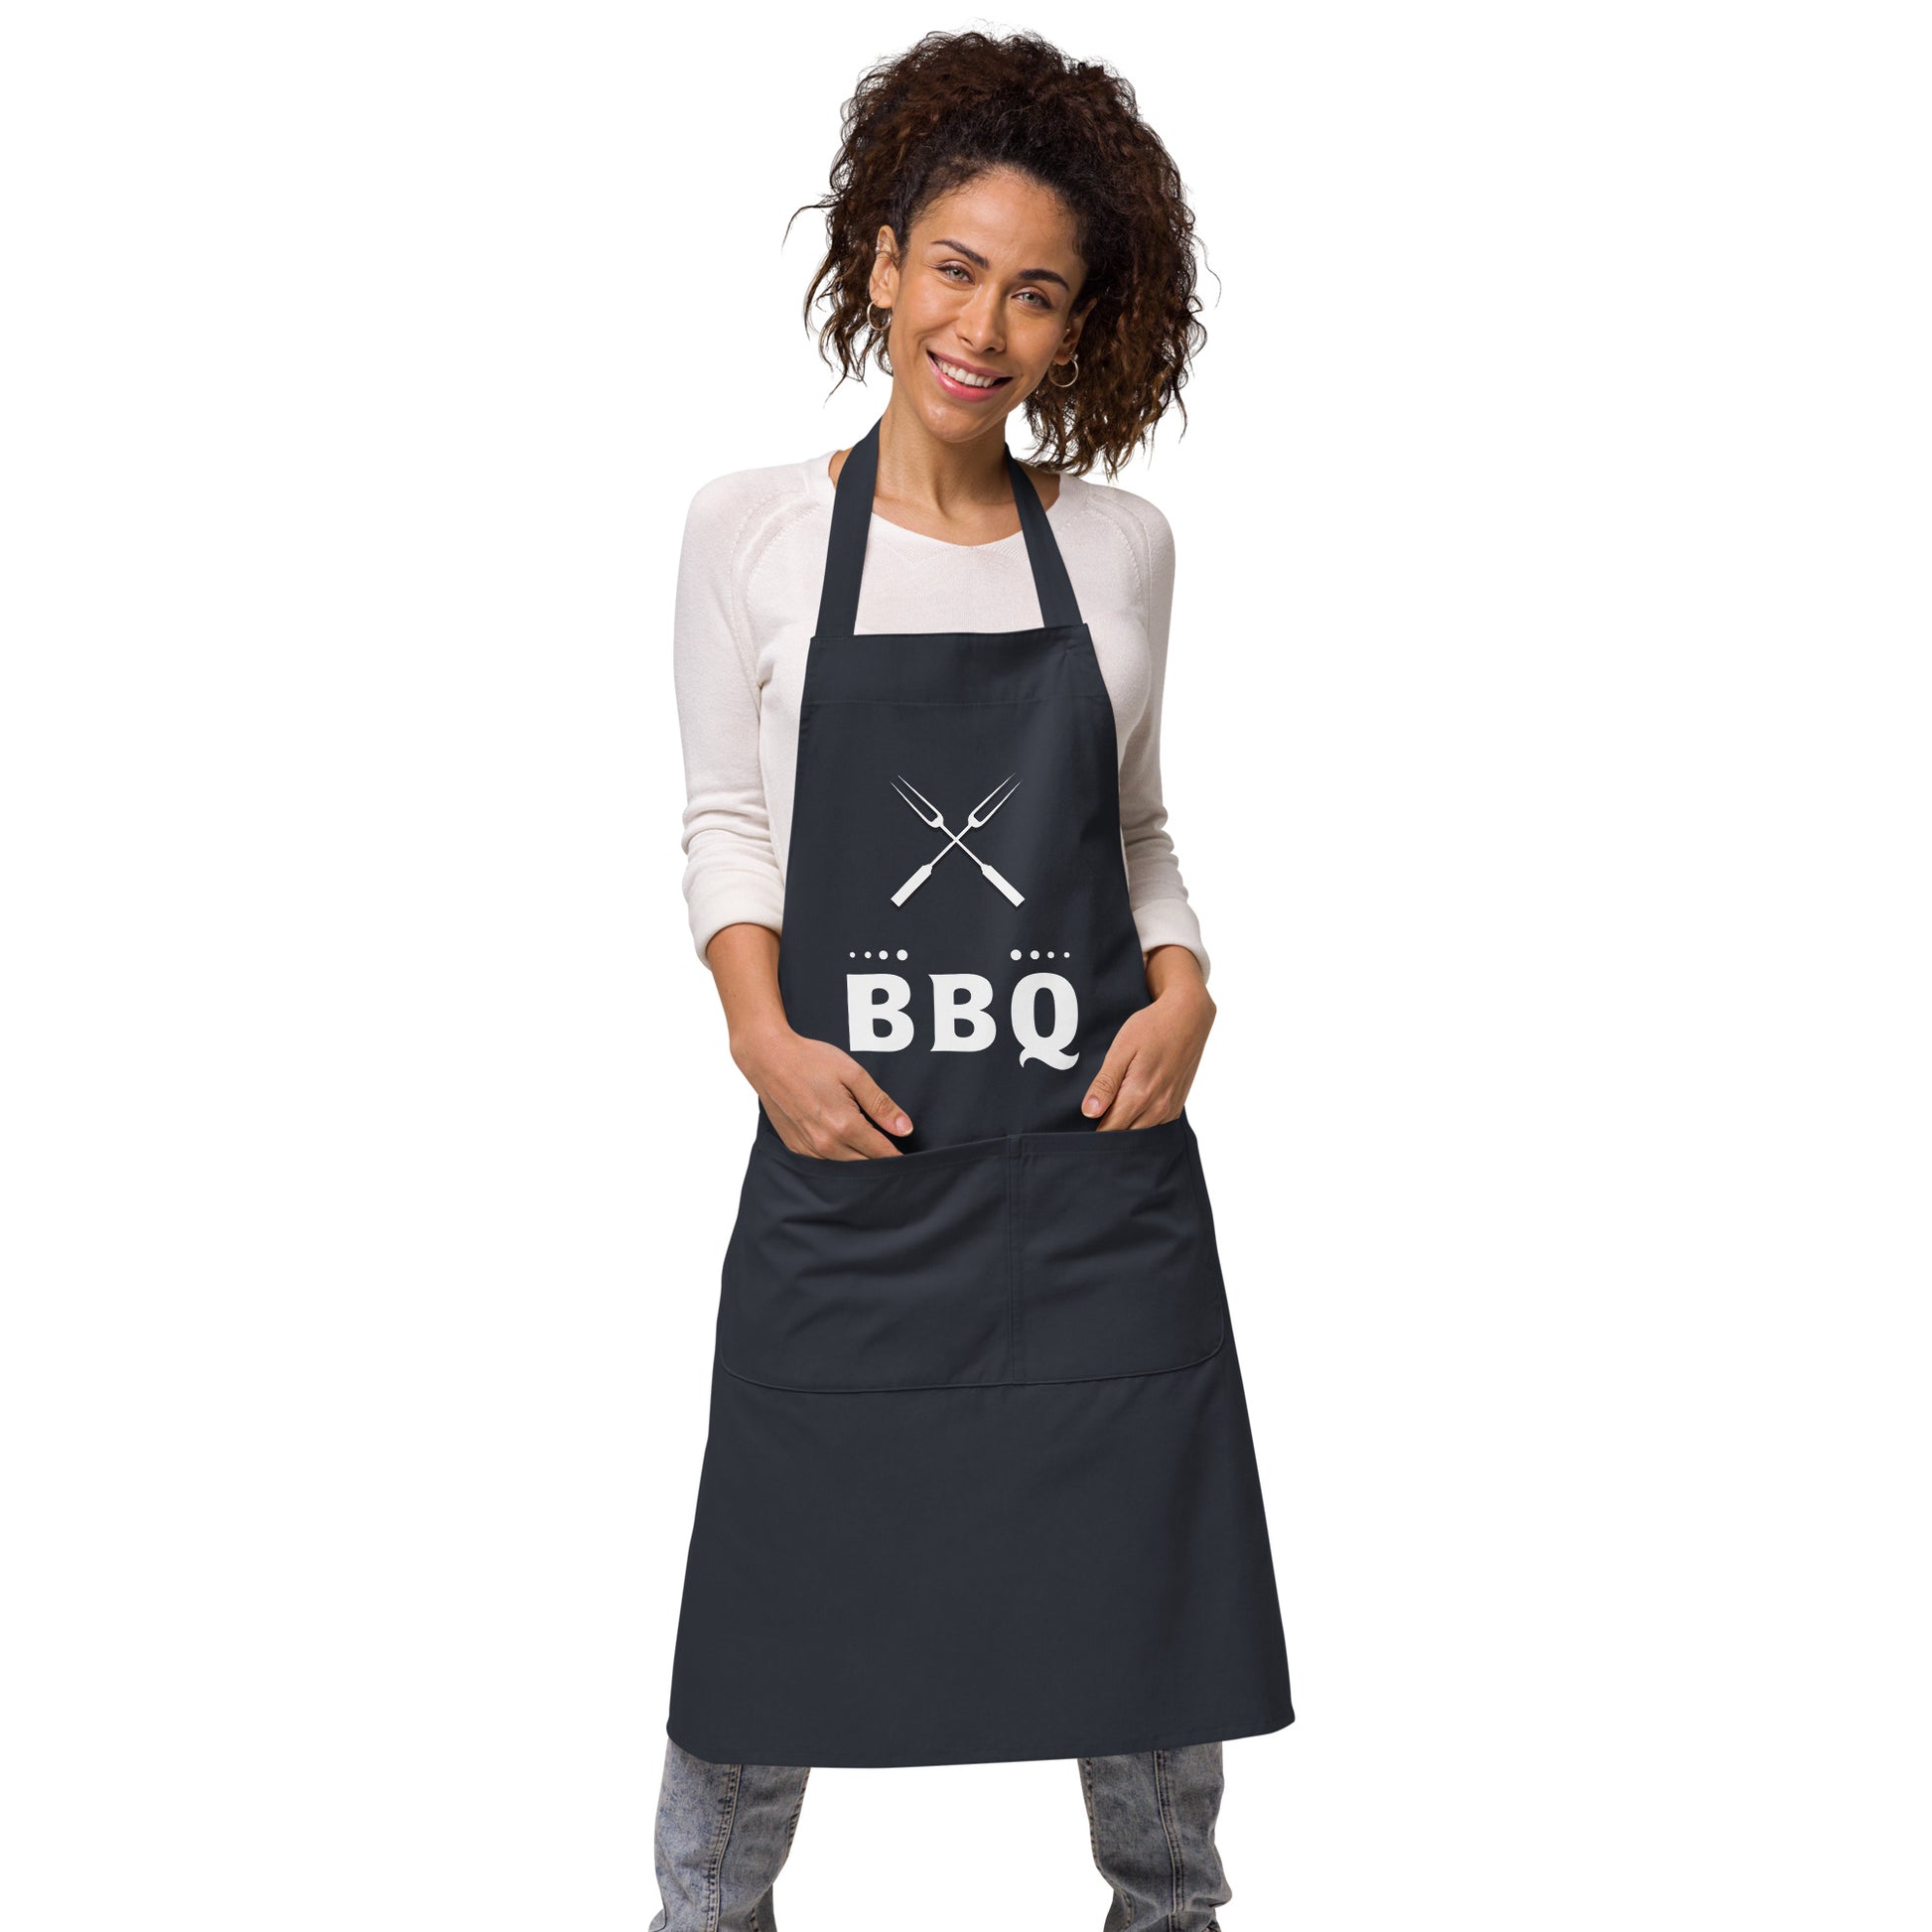 navy blue apron with meat fork and text "BBQ"